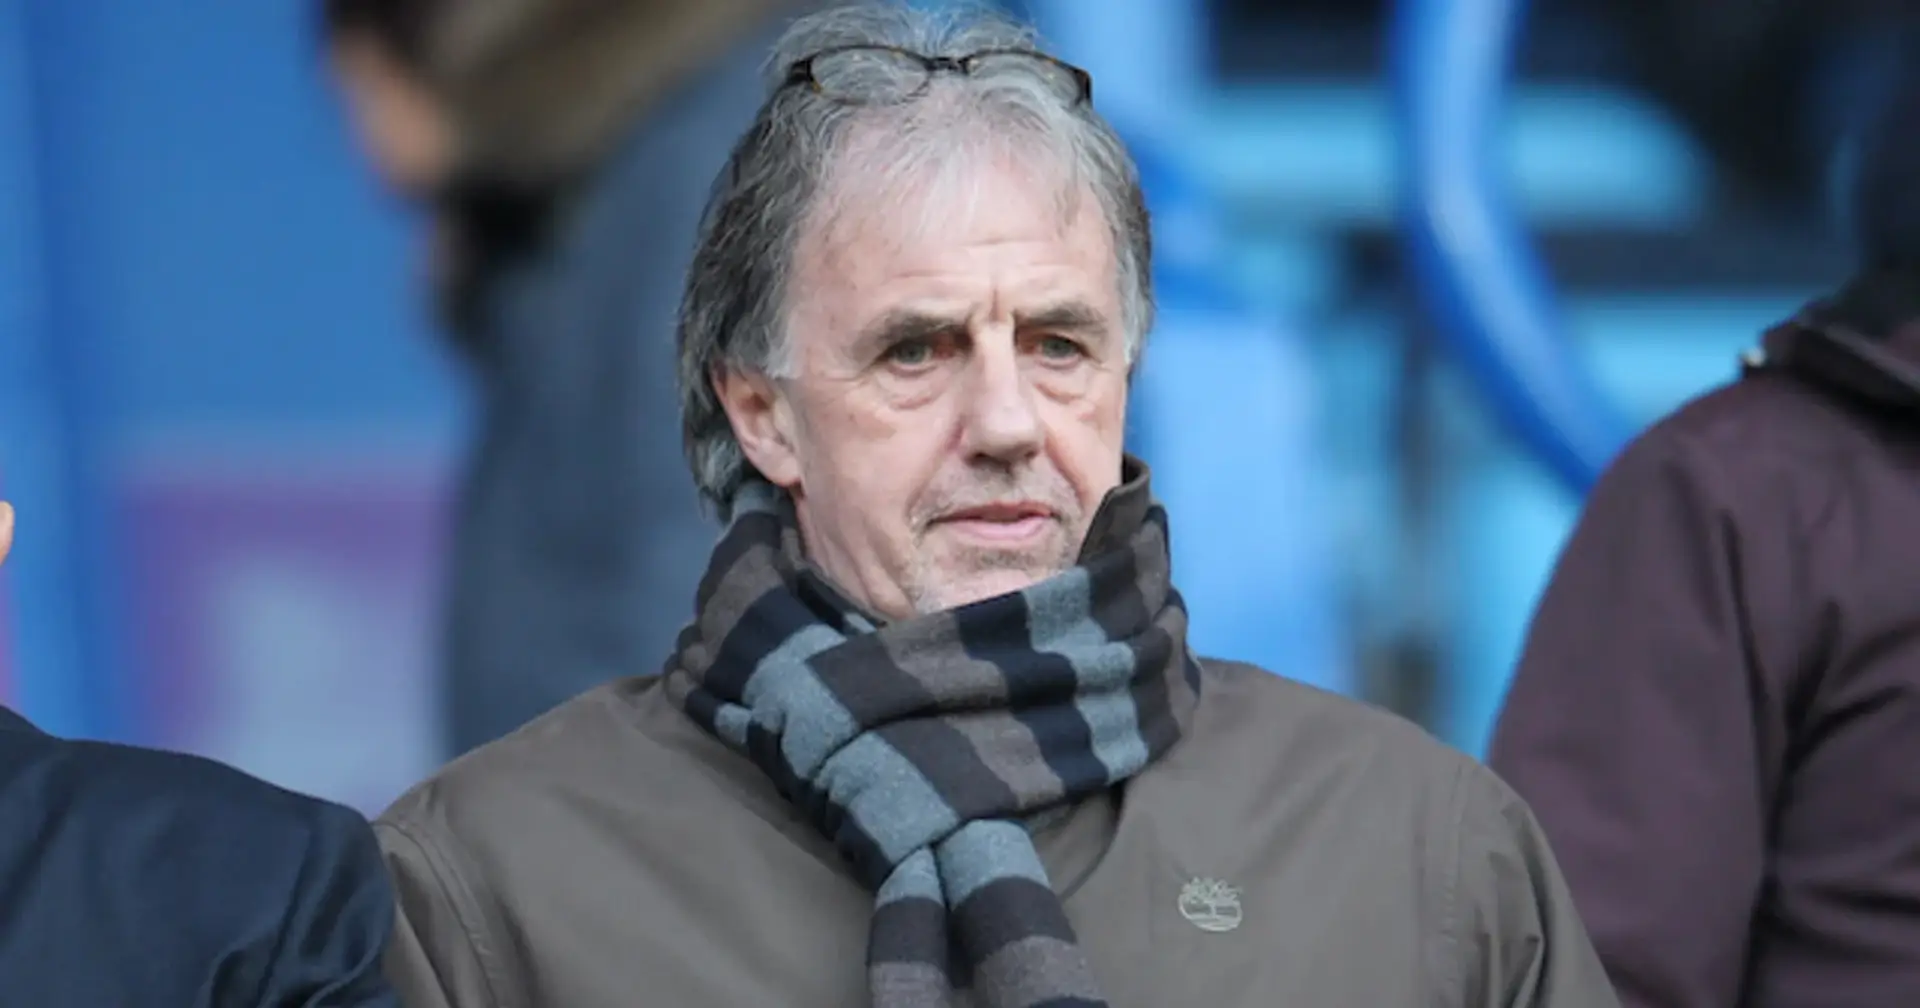 Mark Lawrenson names 2 Leeds players Liverpool should watch out for in Premier League opener